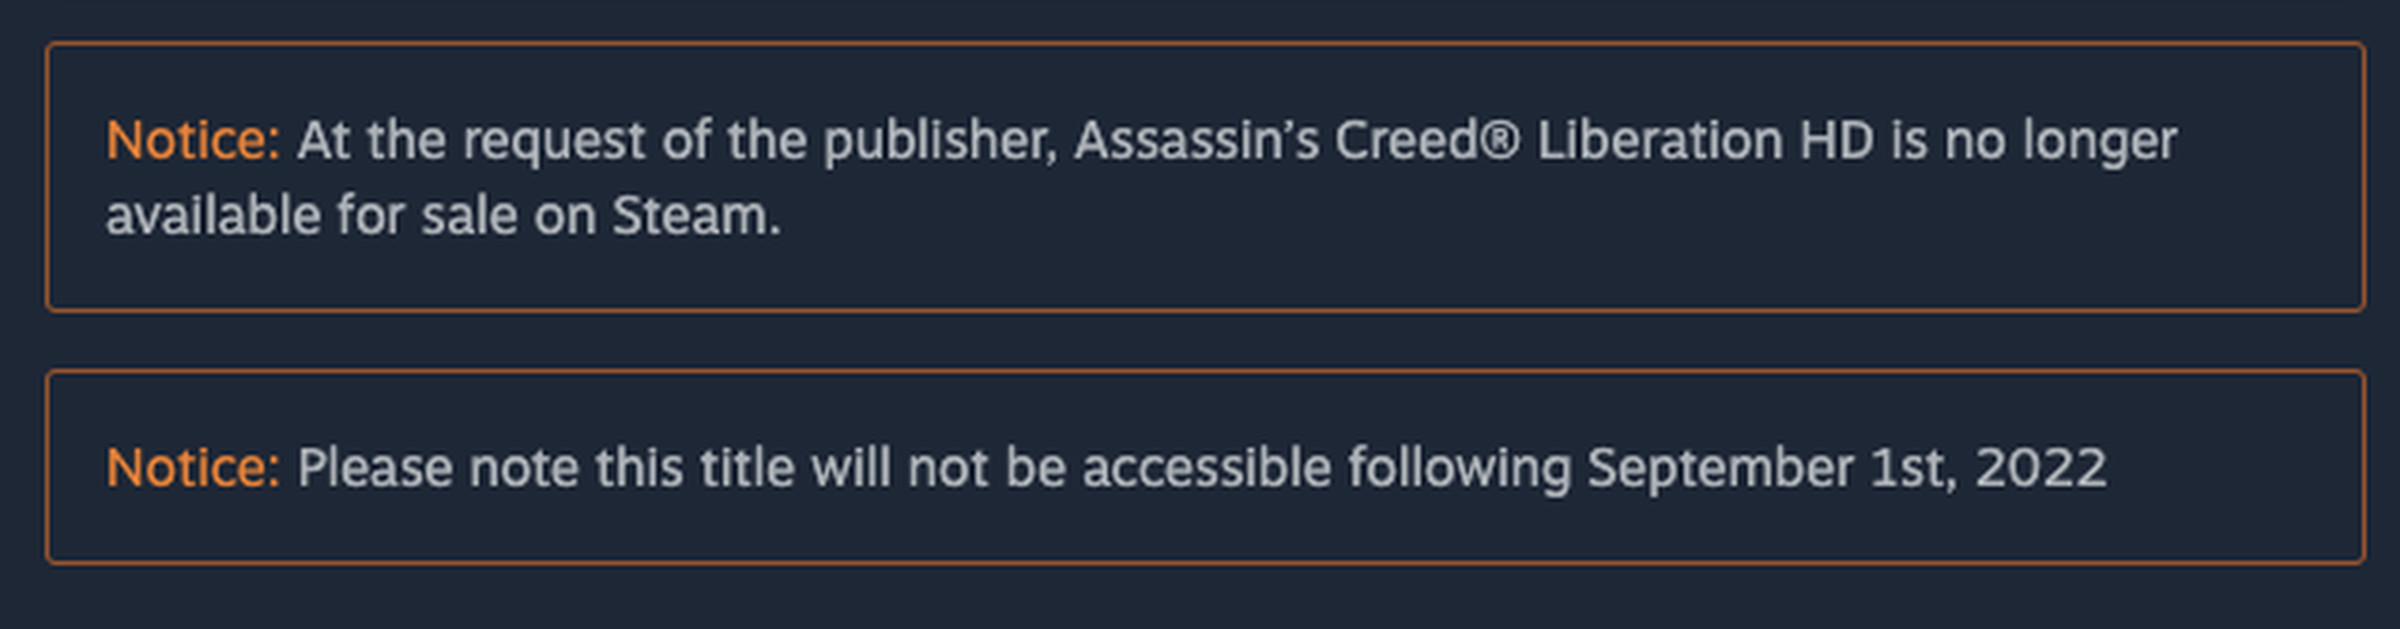 The notices on Assassin’s Creed Liberation HD’s Steam page. 